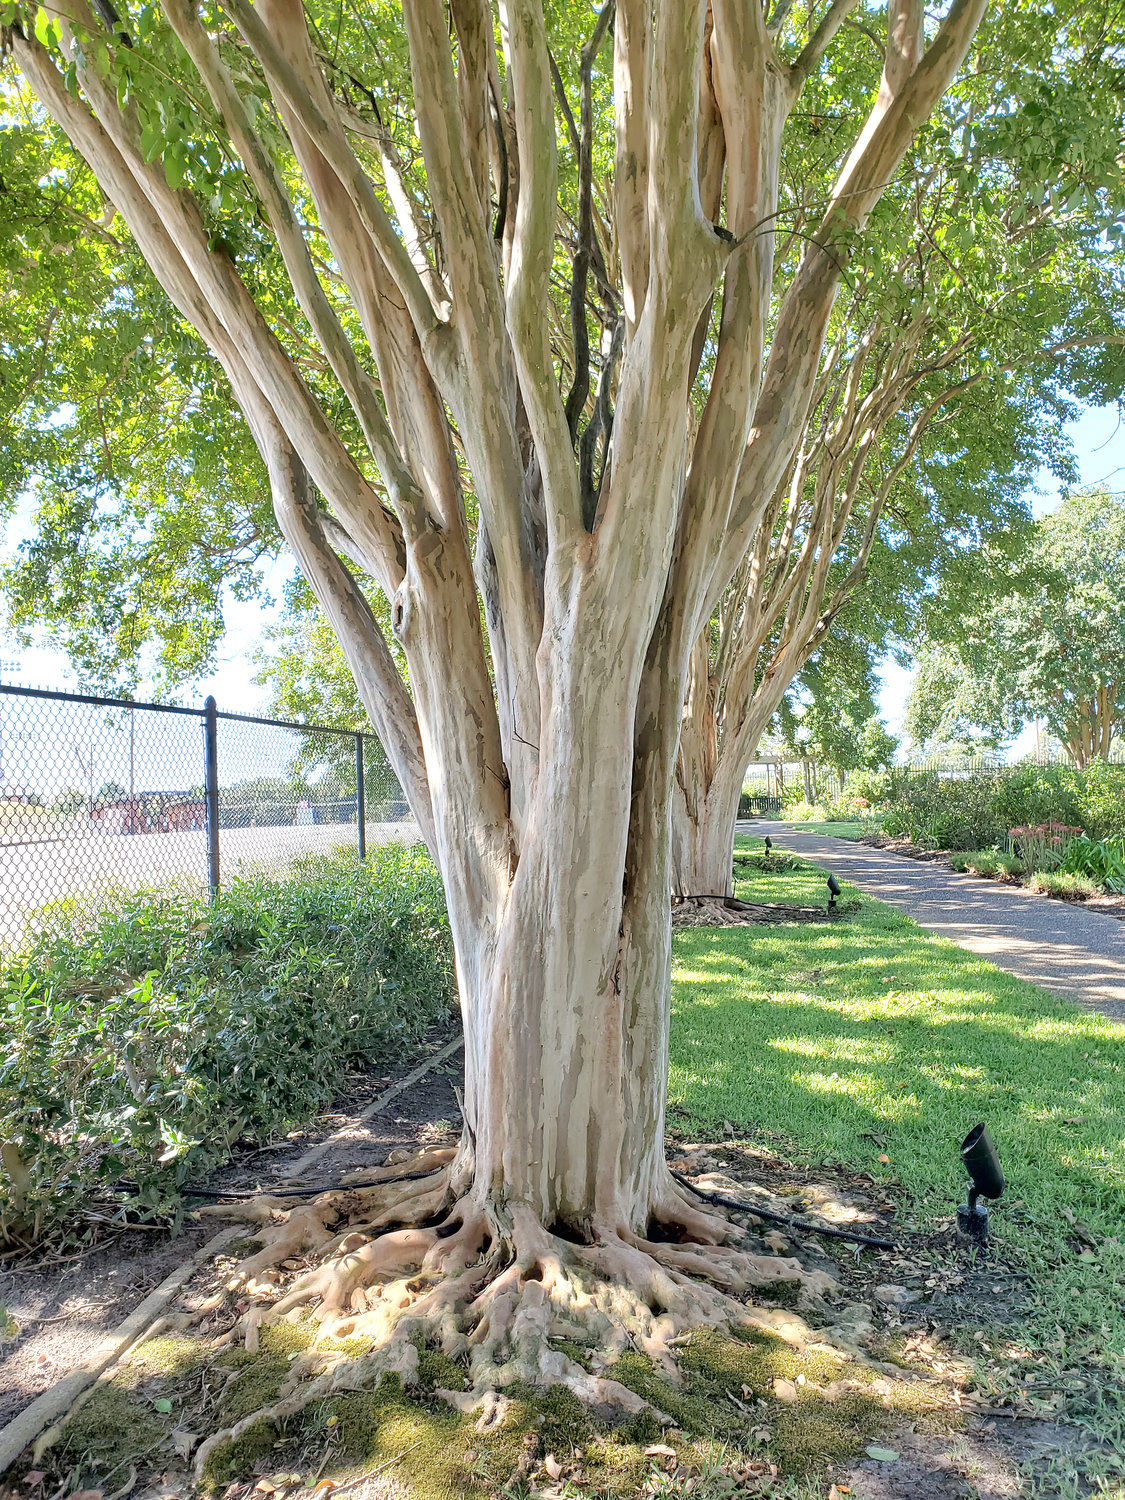 The crape myrtle showcases its root flare.